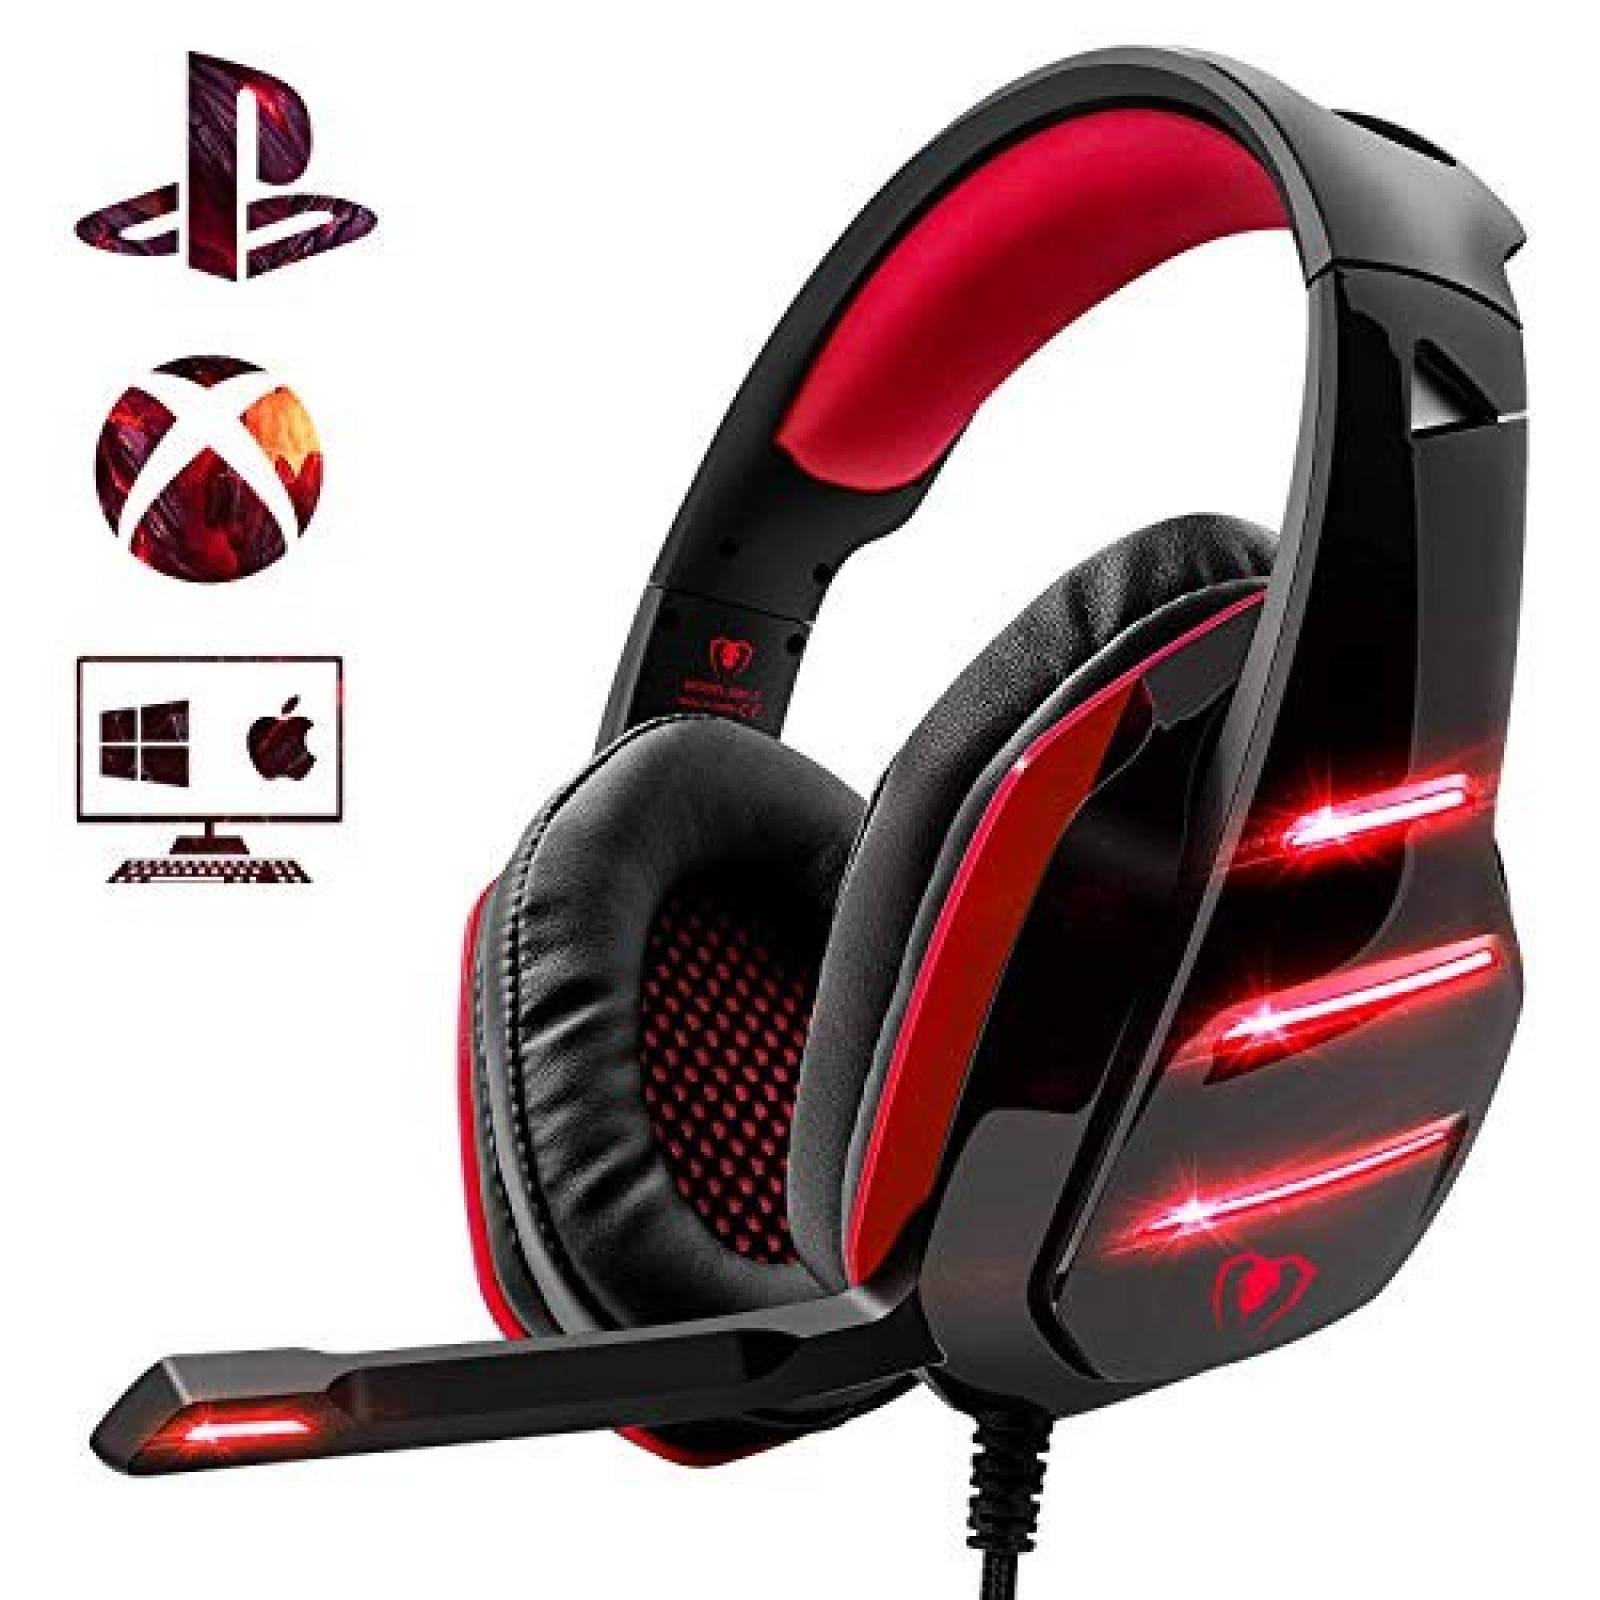 Auriculares Beexcellent p/gamers PS4 Xbox One PC Mac -Rojo